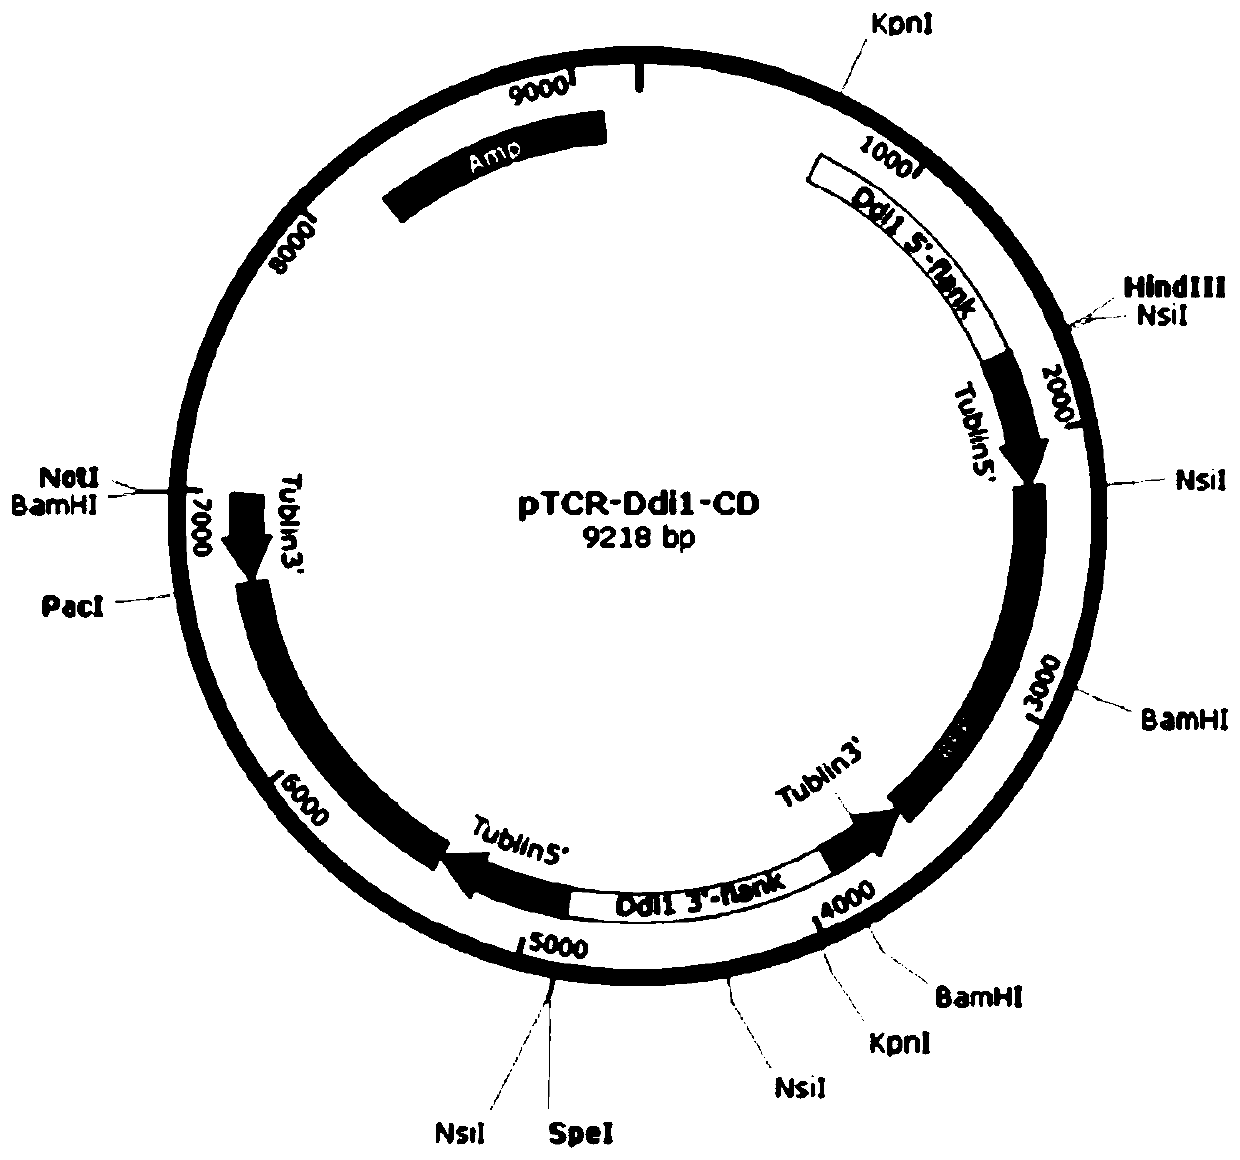 Toxoplasma gondii strain with ddi1, rad23 and dsk2 genes deleted, and construction method and application of toxoplasma gondii strain